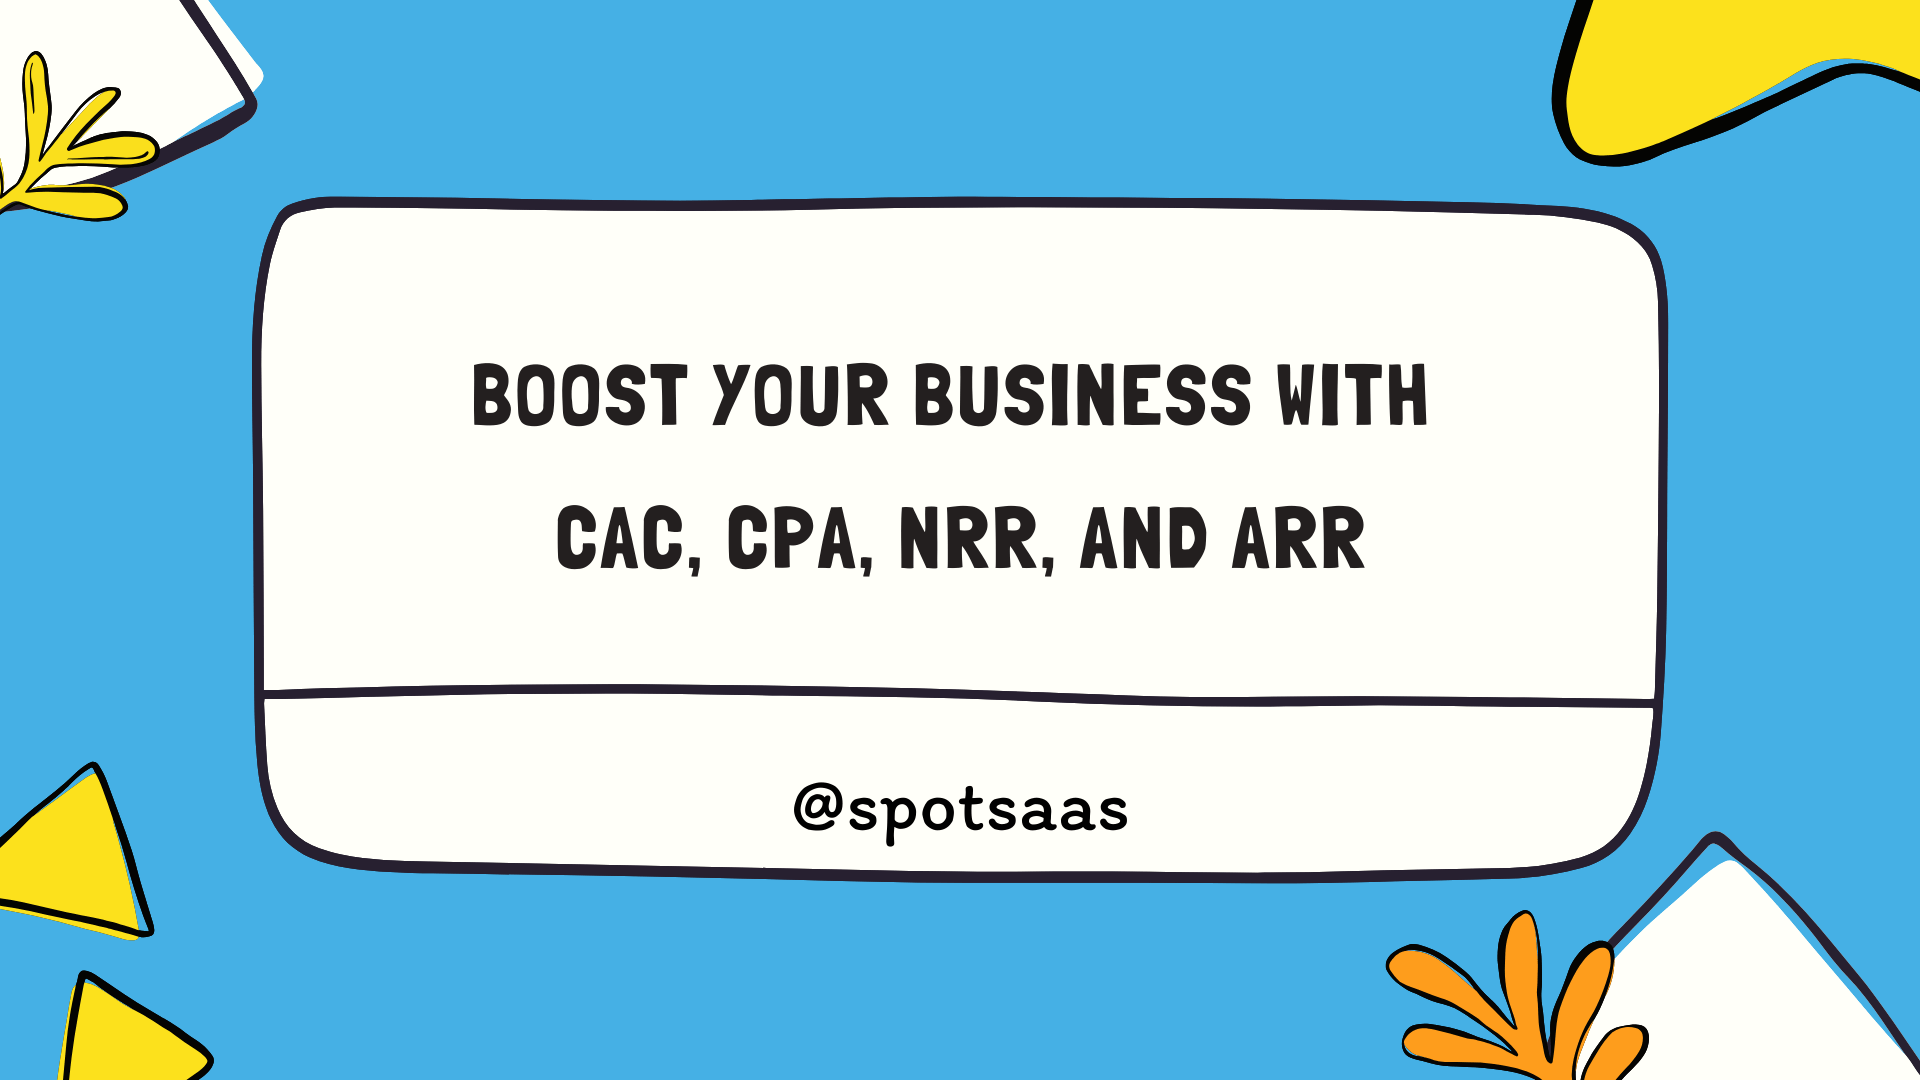 Boost Your Business with CAC, CPA, NRR, and ARR